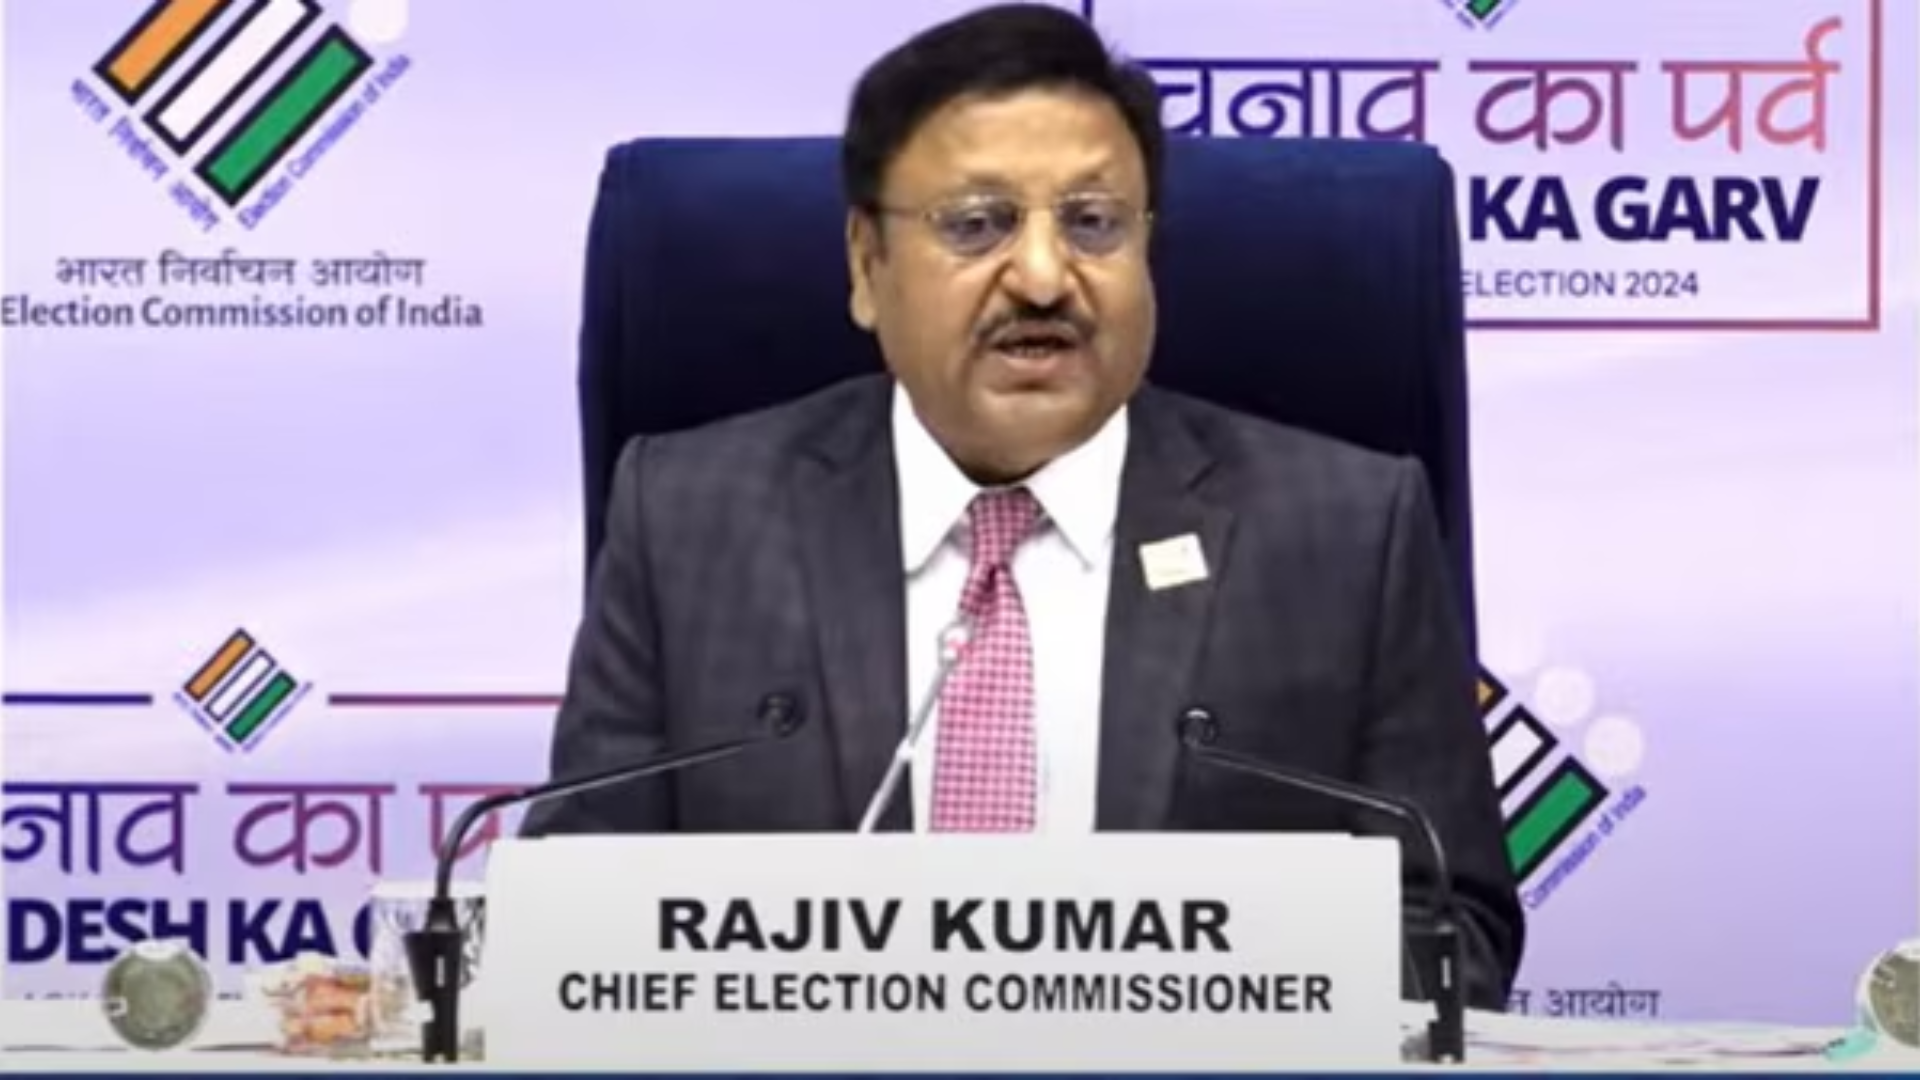 Election Commission Launches “Know Your Candidate” App Ahead of Lok Sabha Elections